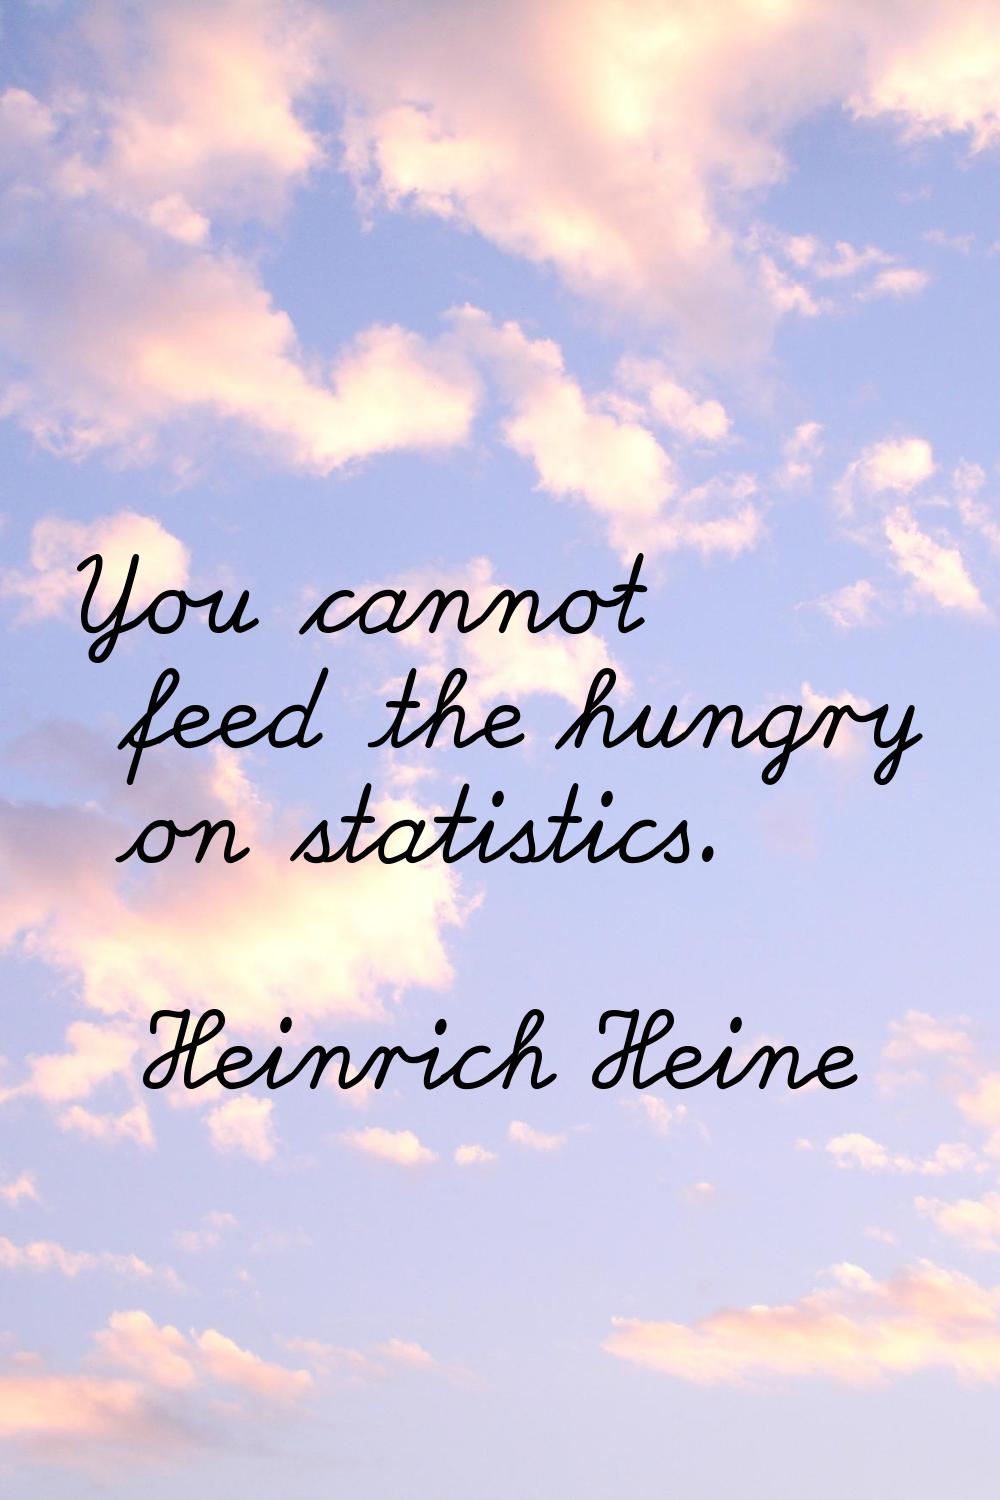 You cannot feed the hungry on statistics.